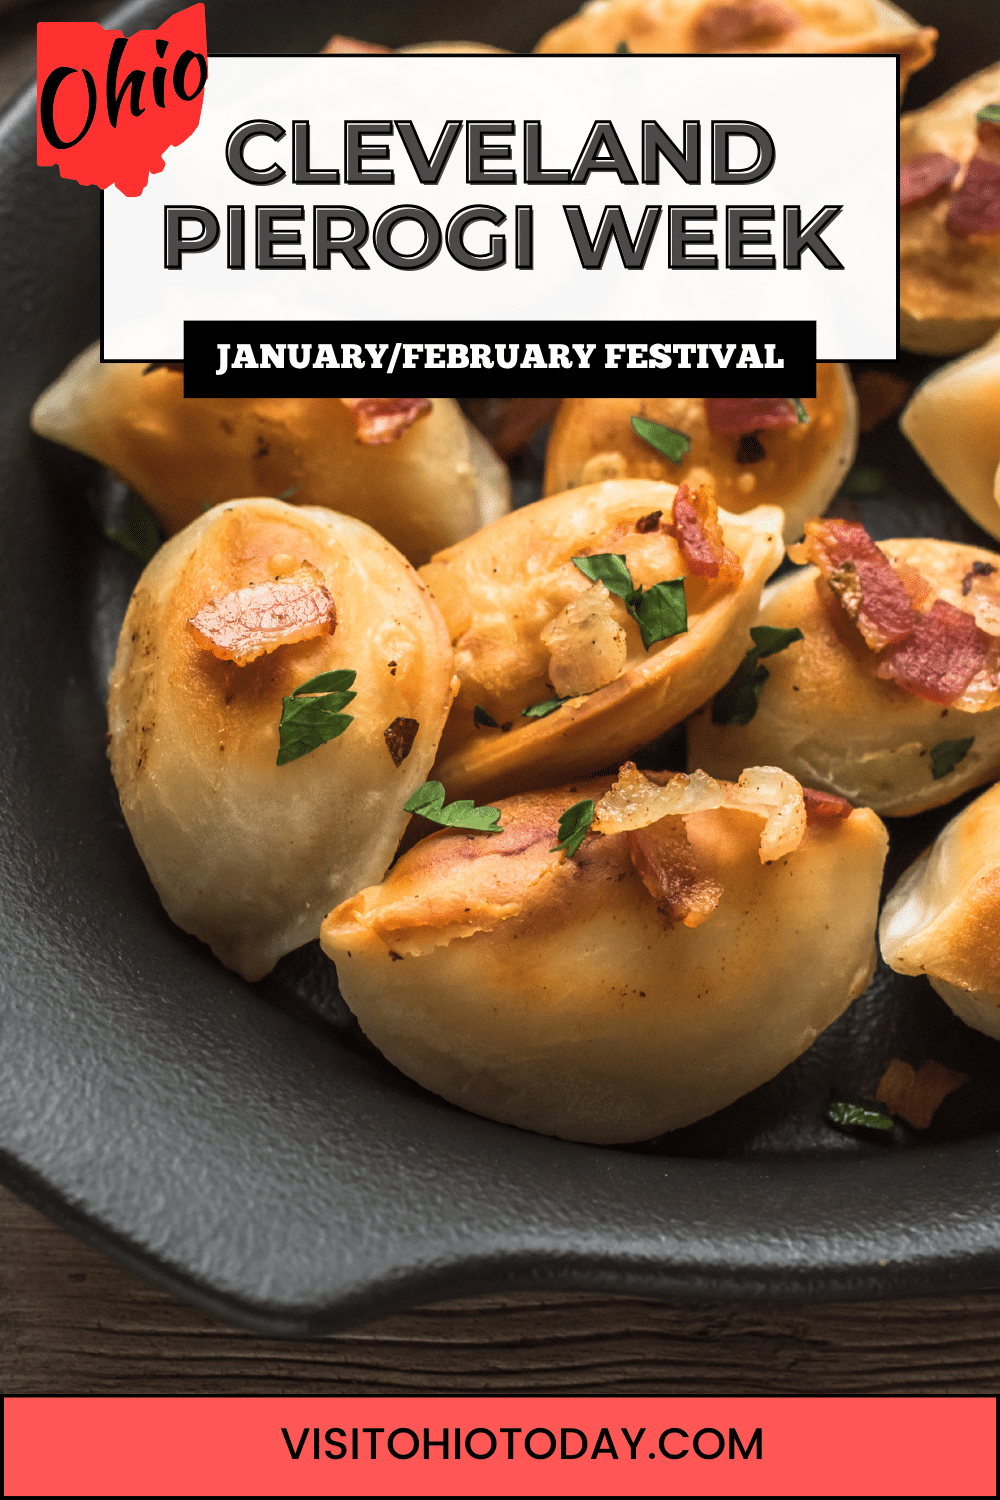 Indulge in your favorite Polish dumplings around the Cleveland area during this week celebrating the pierogi. From January 29 to February 4, 2024.